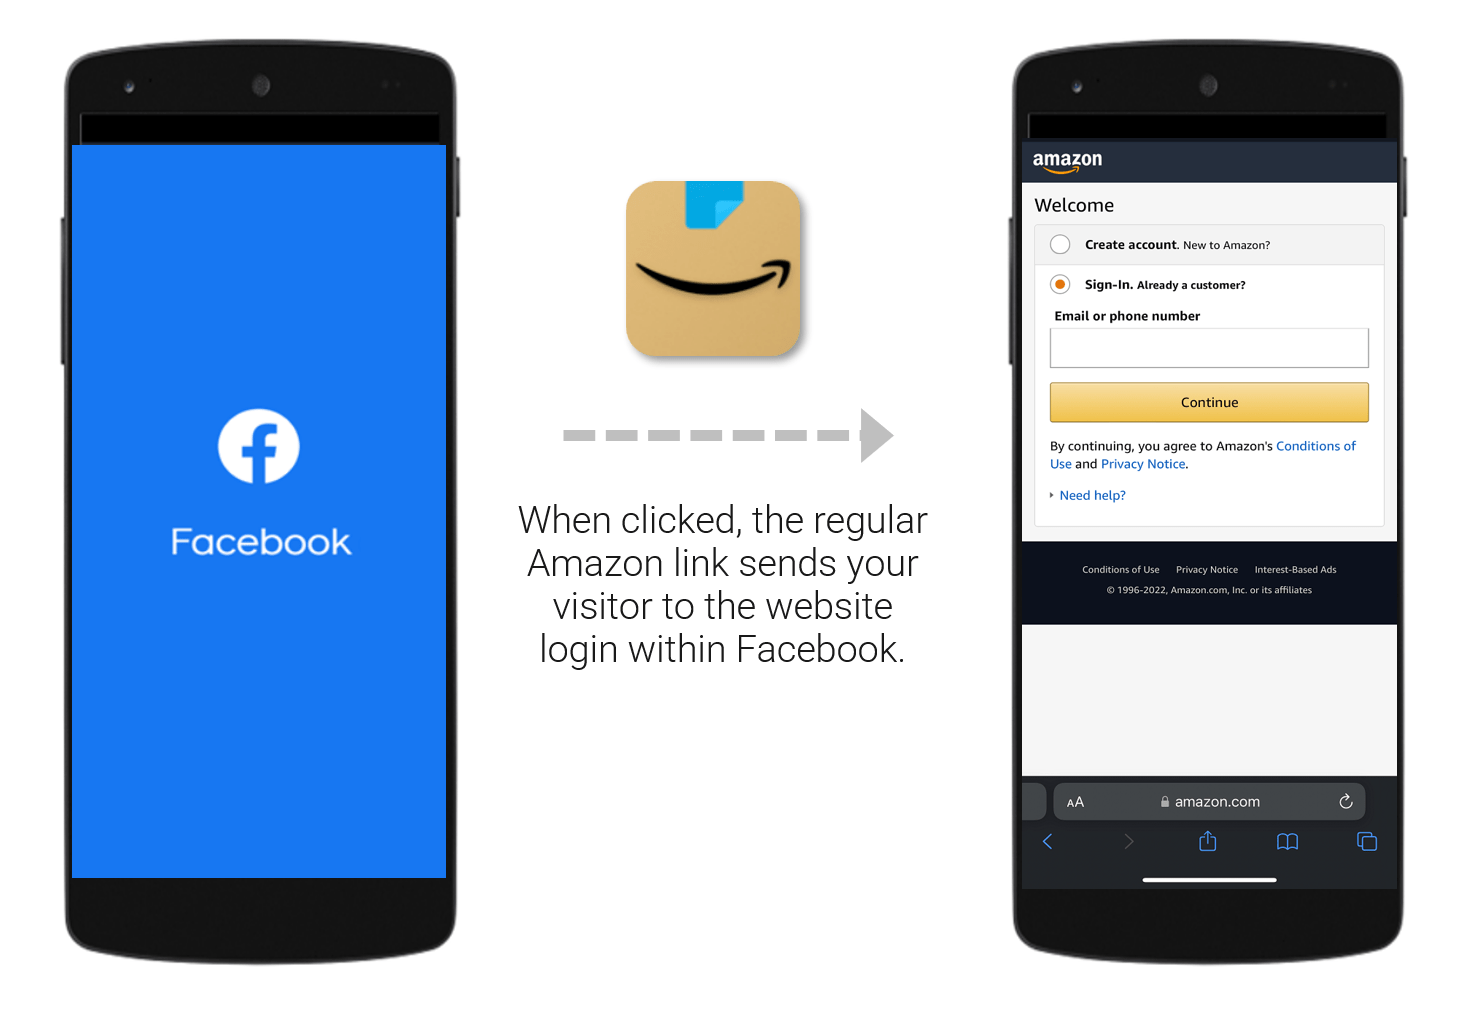 When clicked, the regular Amazon link sends your visitor to the website login within Facebook